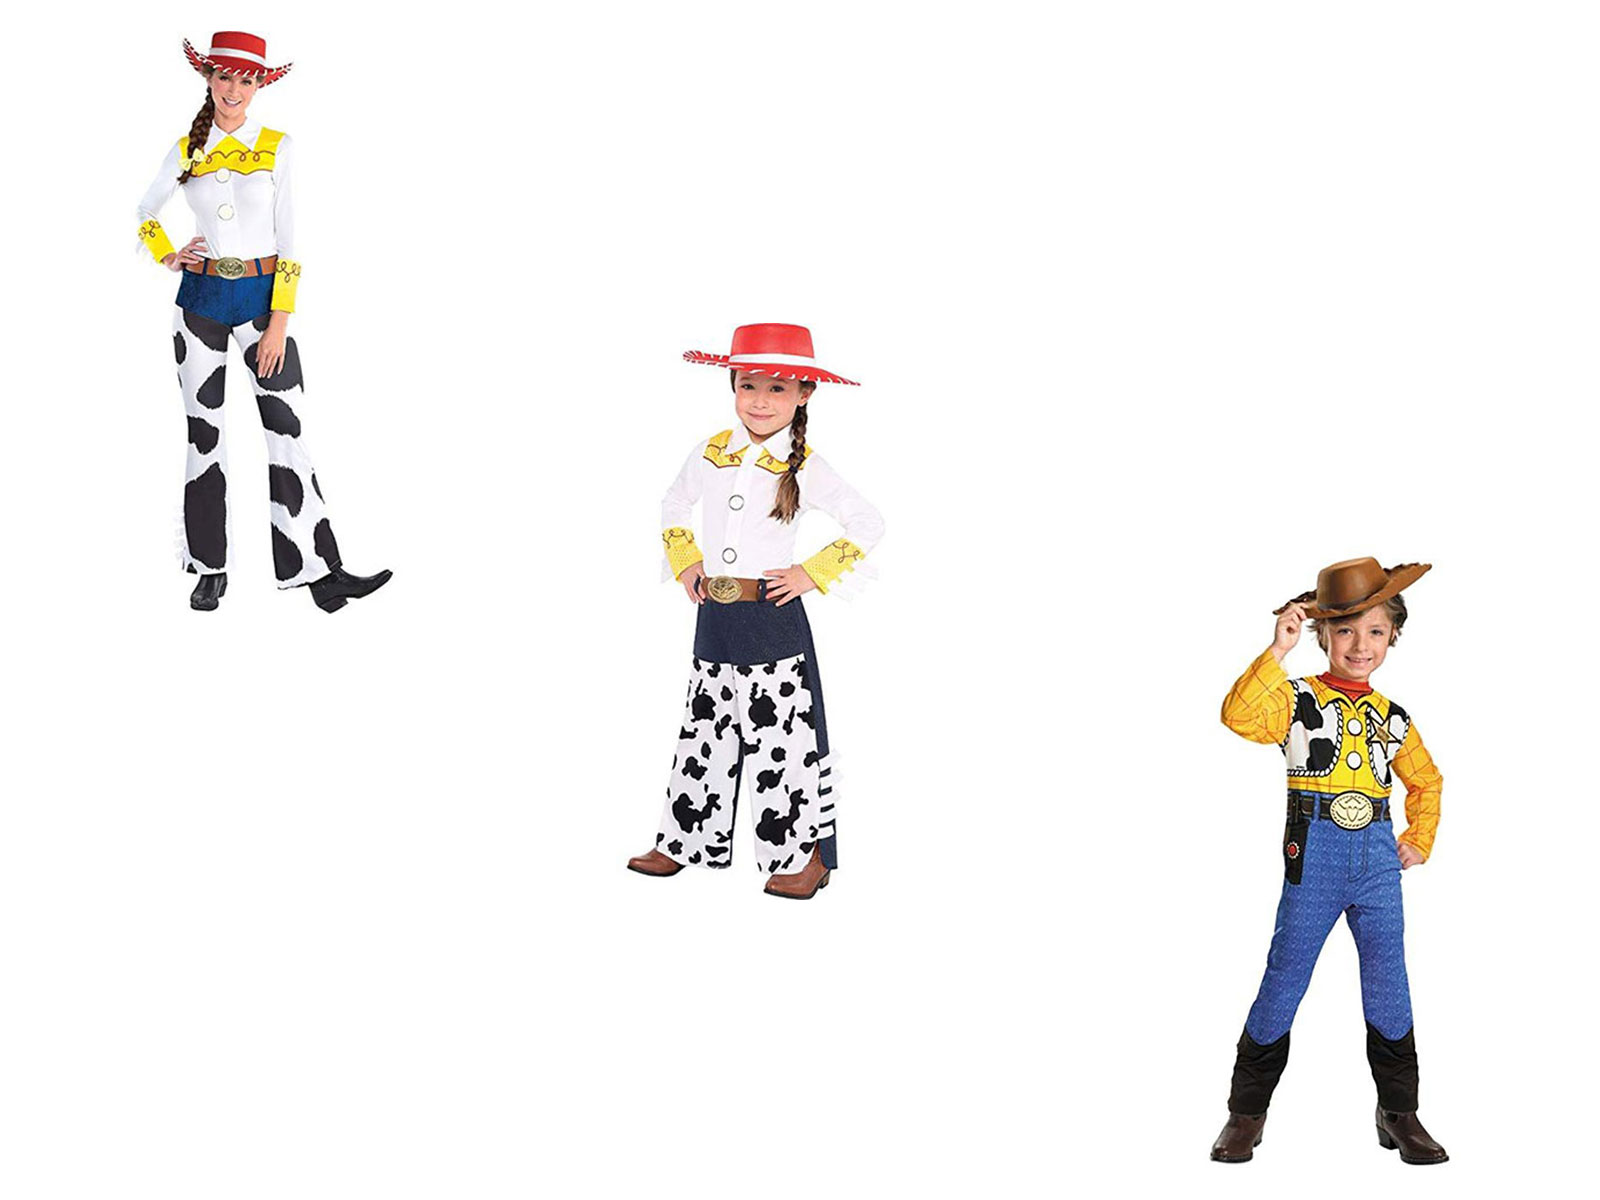 Toy-Story-4-Full-Movie-Costume-Ideas-For-Halloween-2019-F